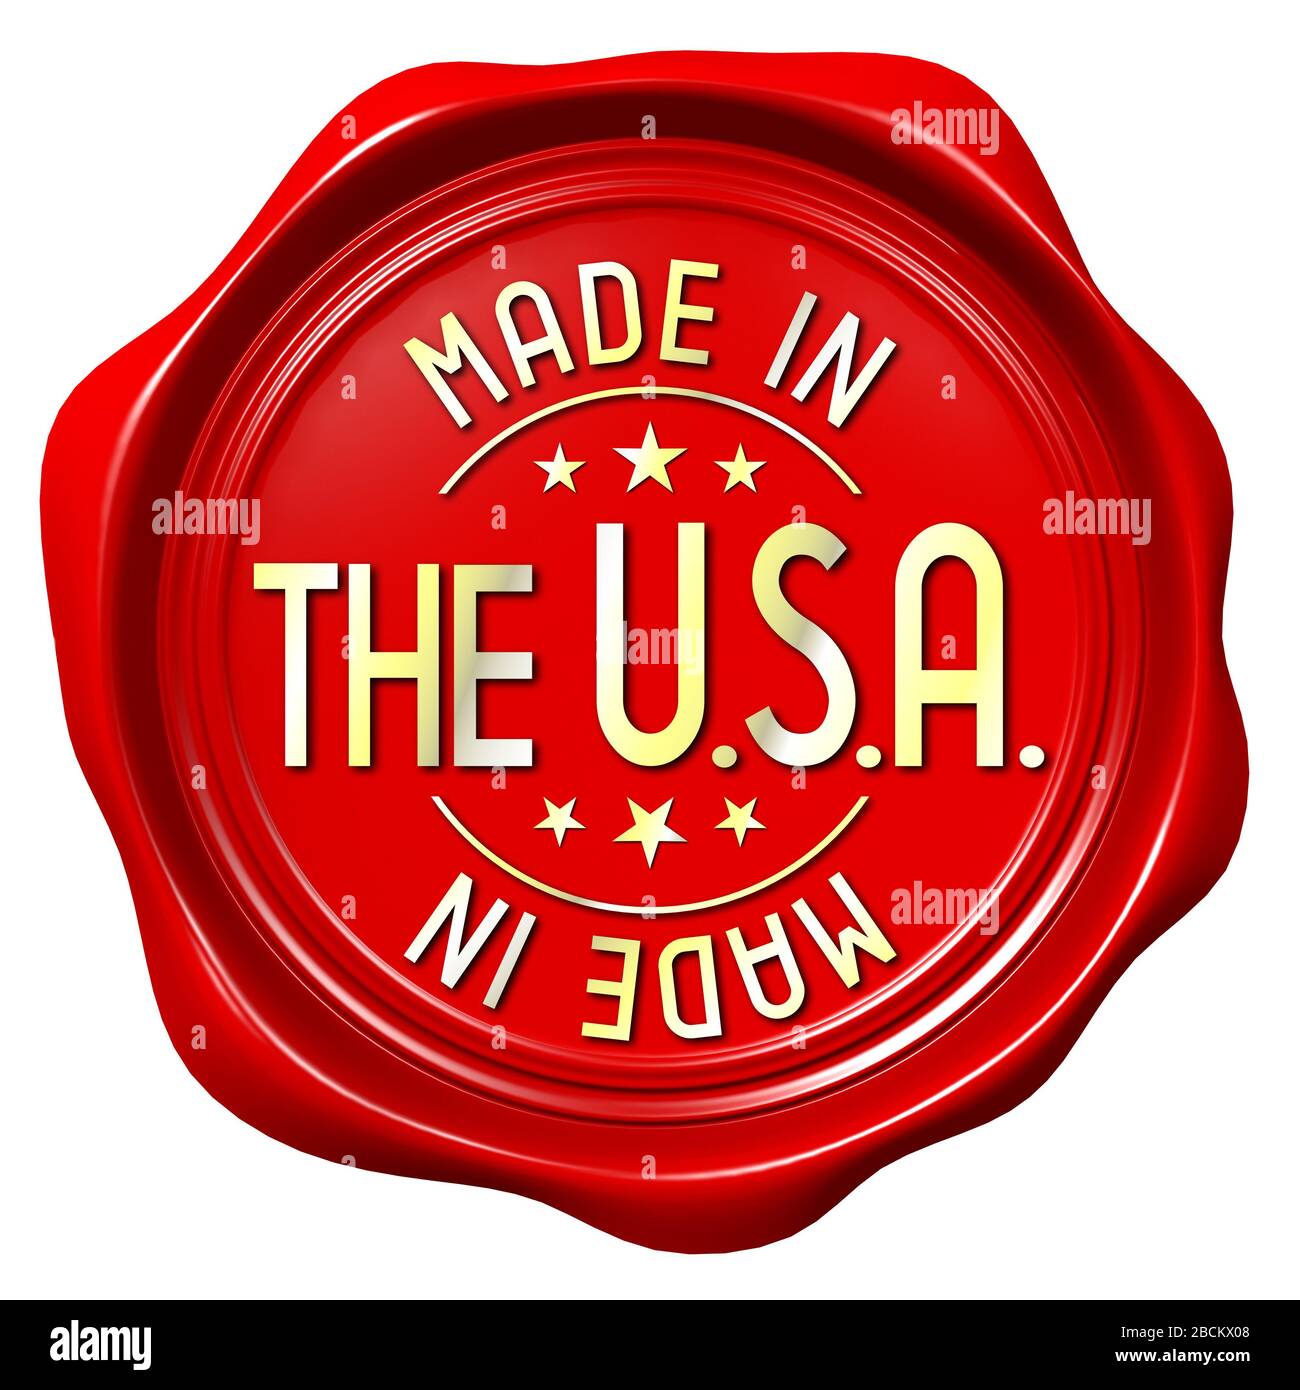 Red wax seal - made in the USA Stock Photo